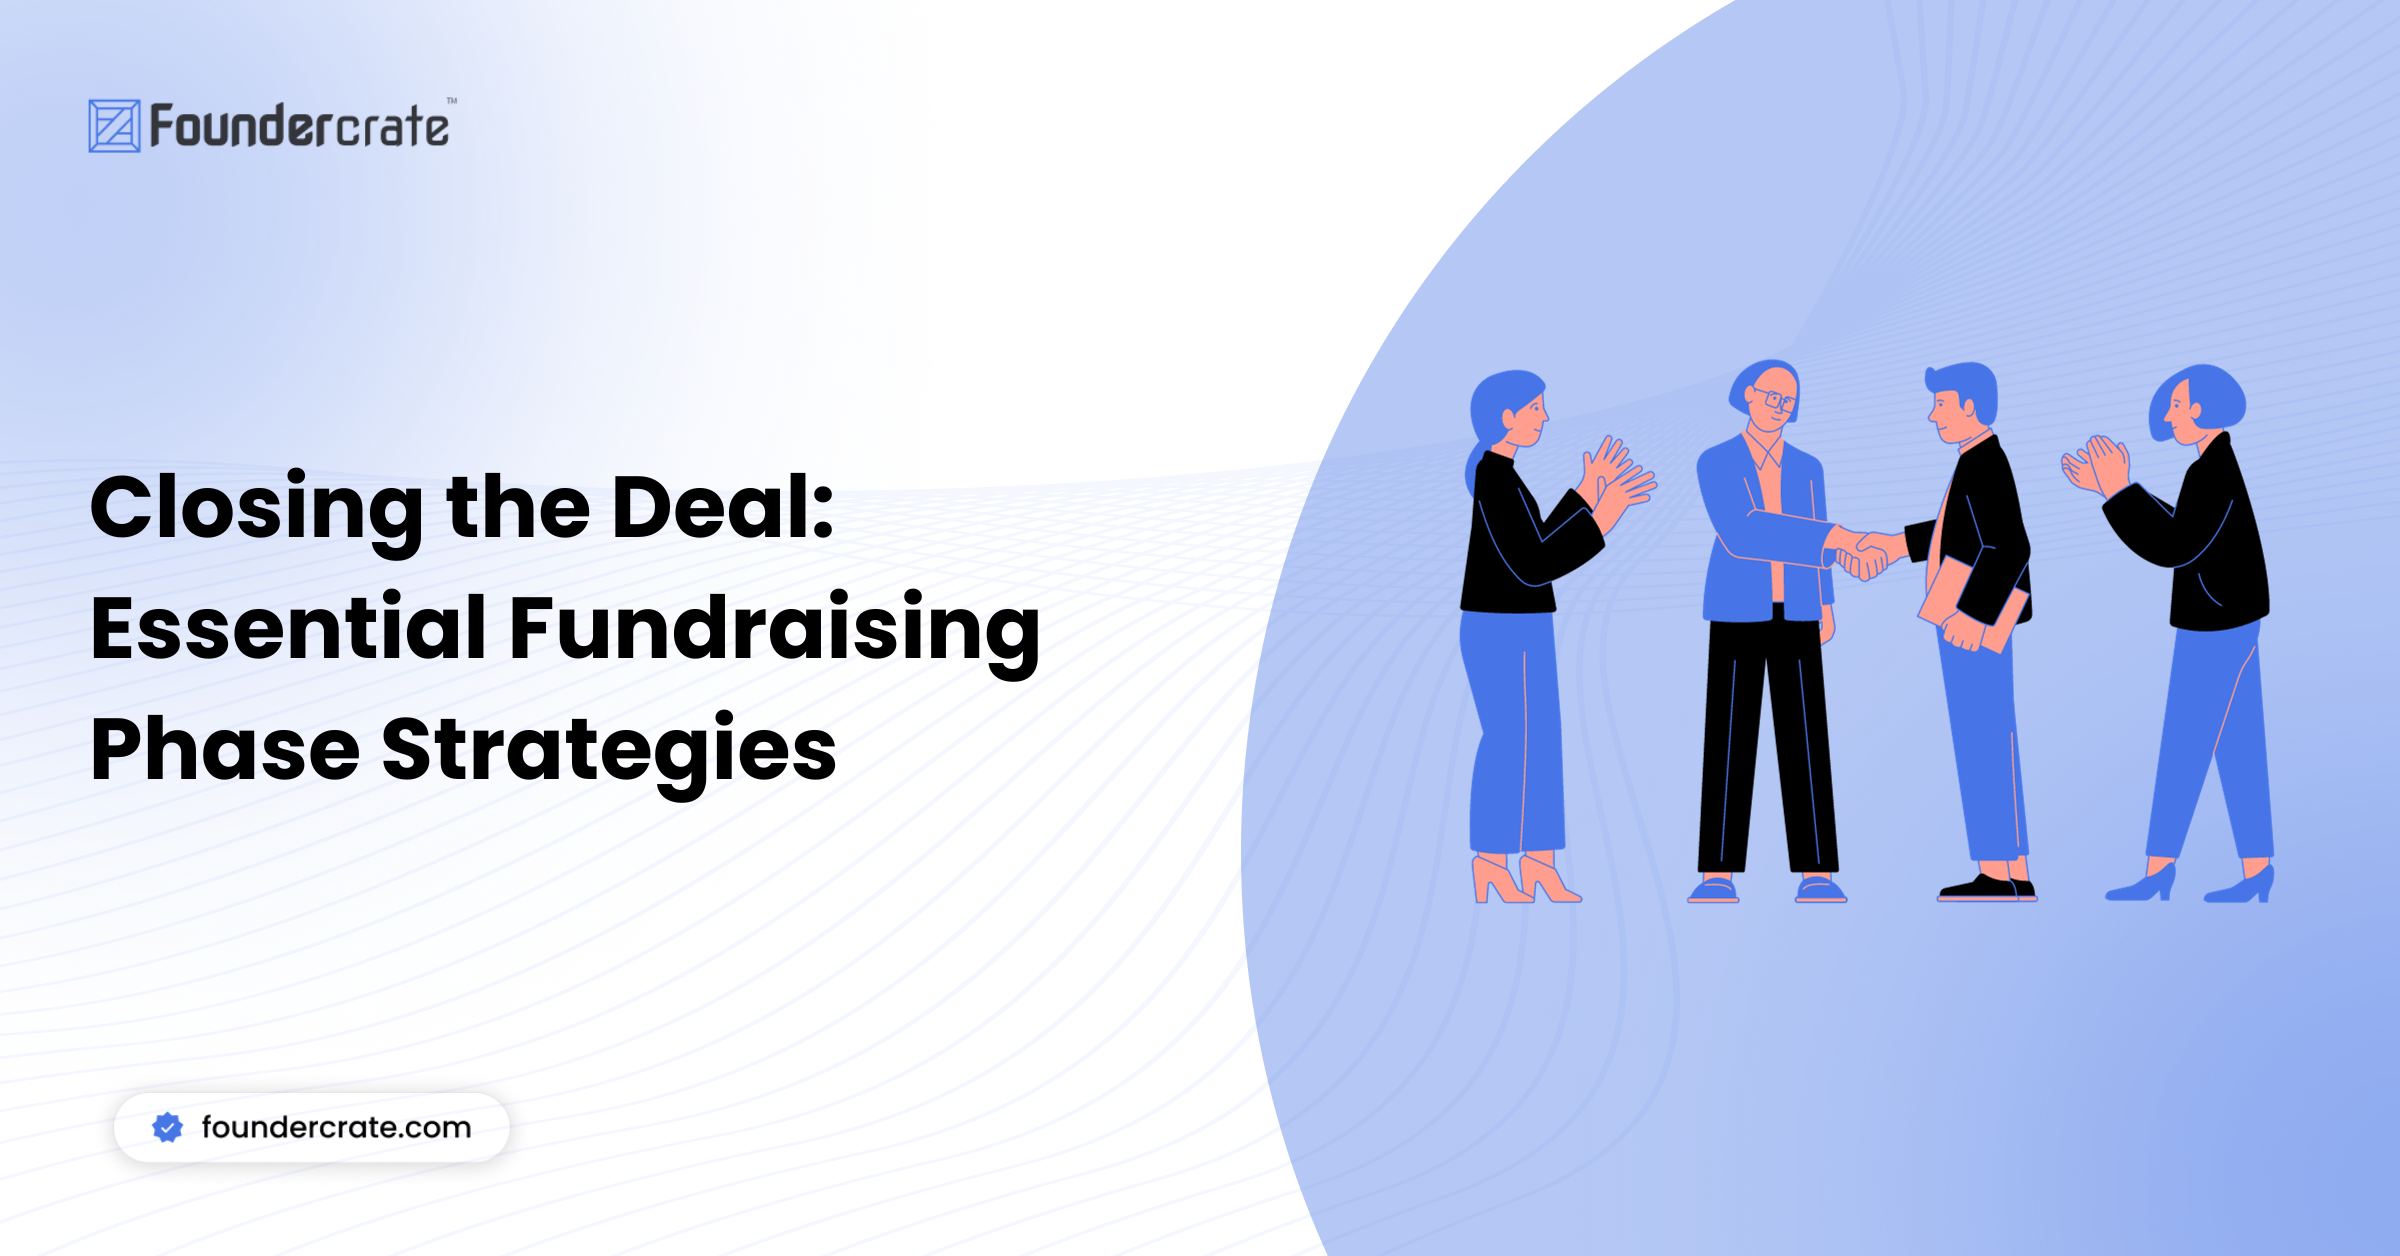 Closing the Deal: Essential Fundraising Phase Strategies